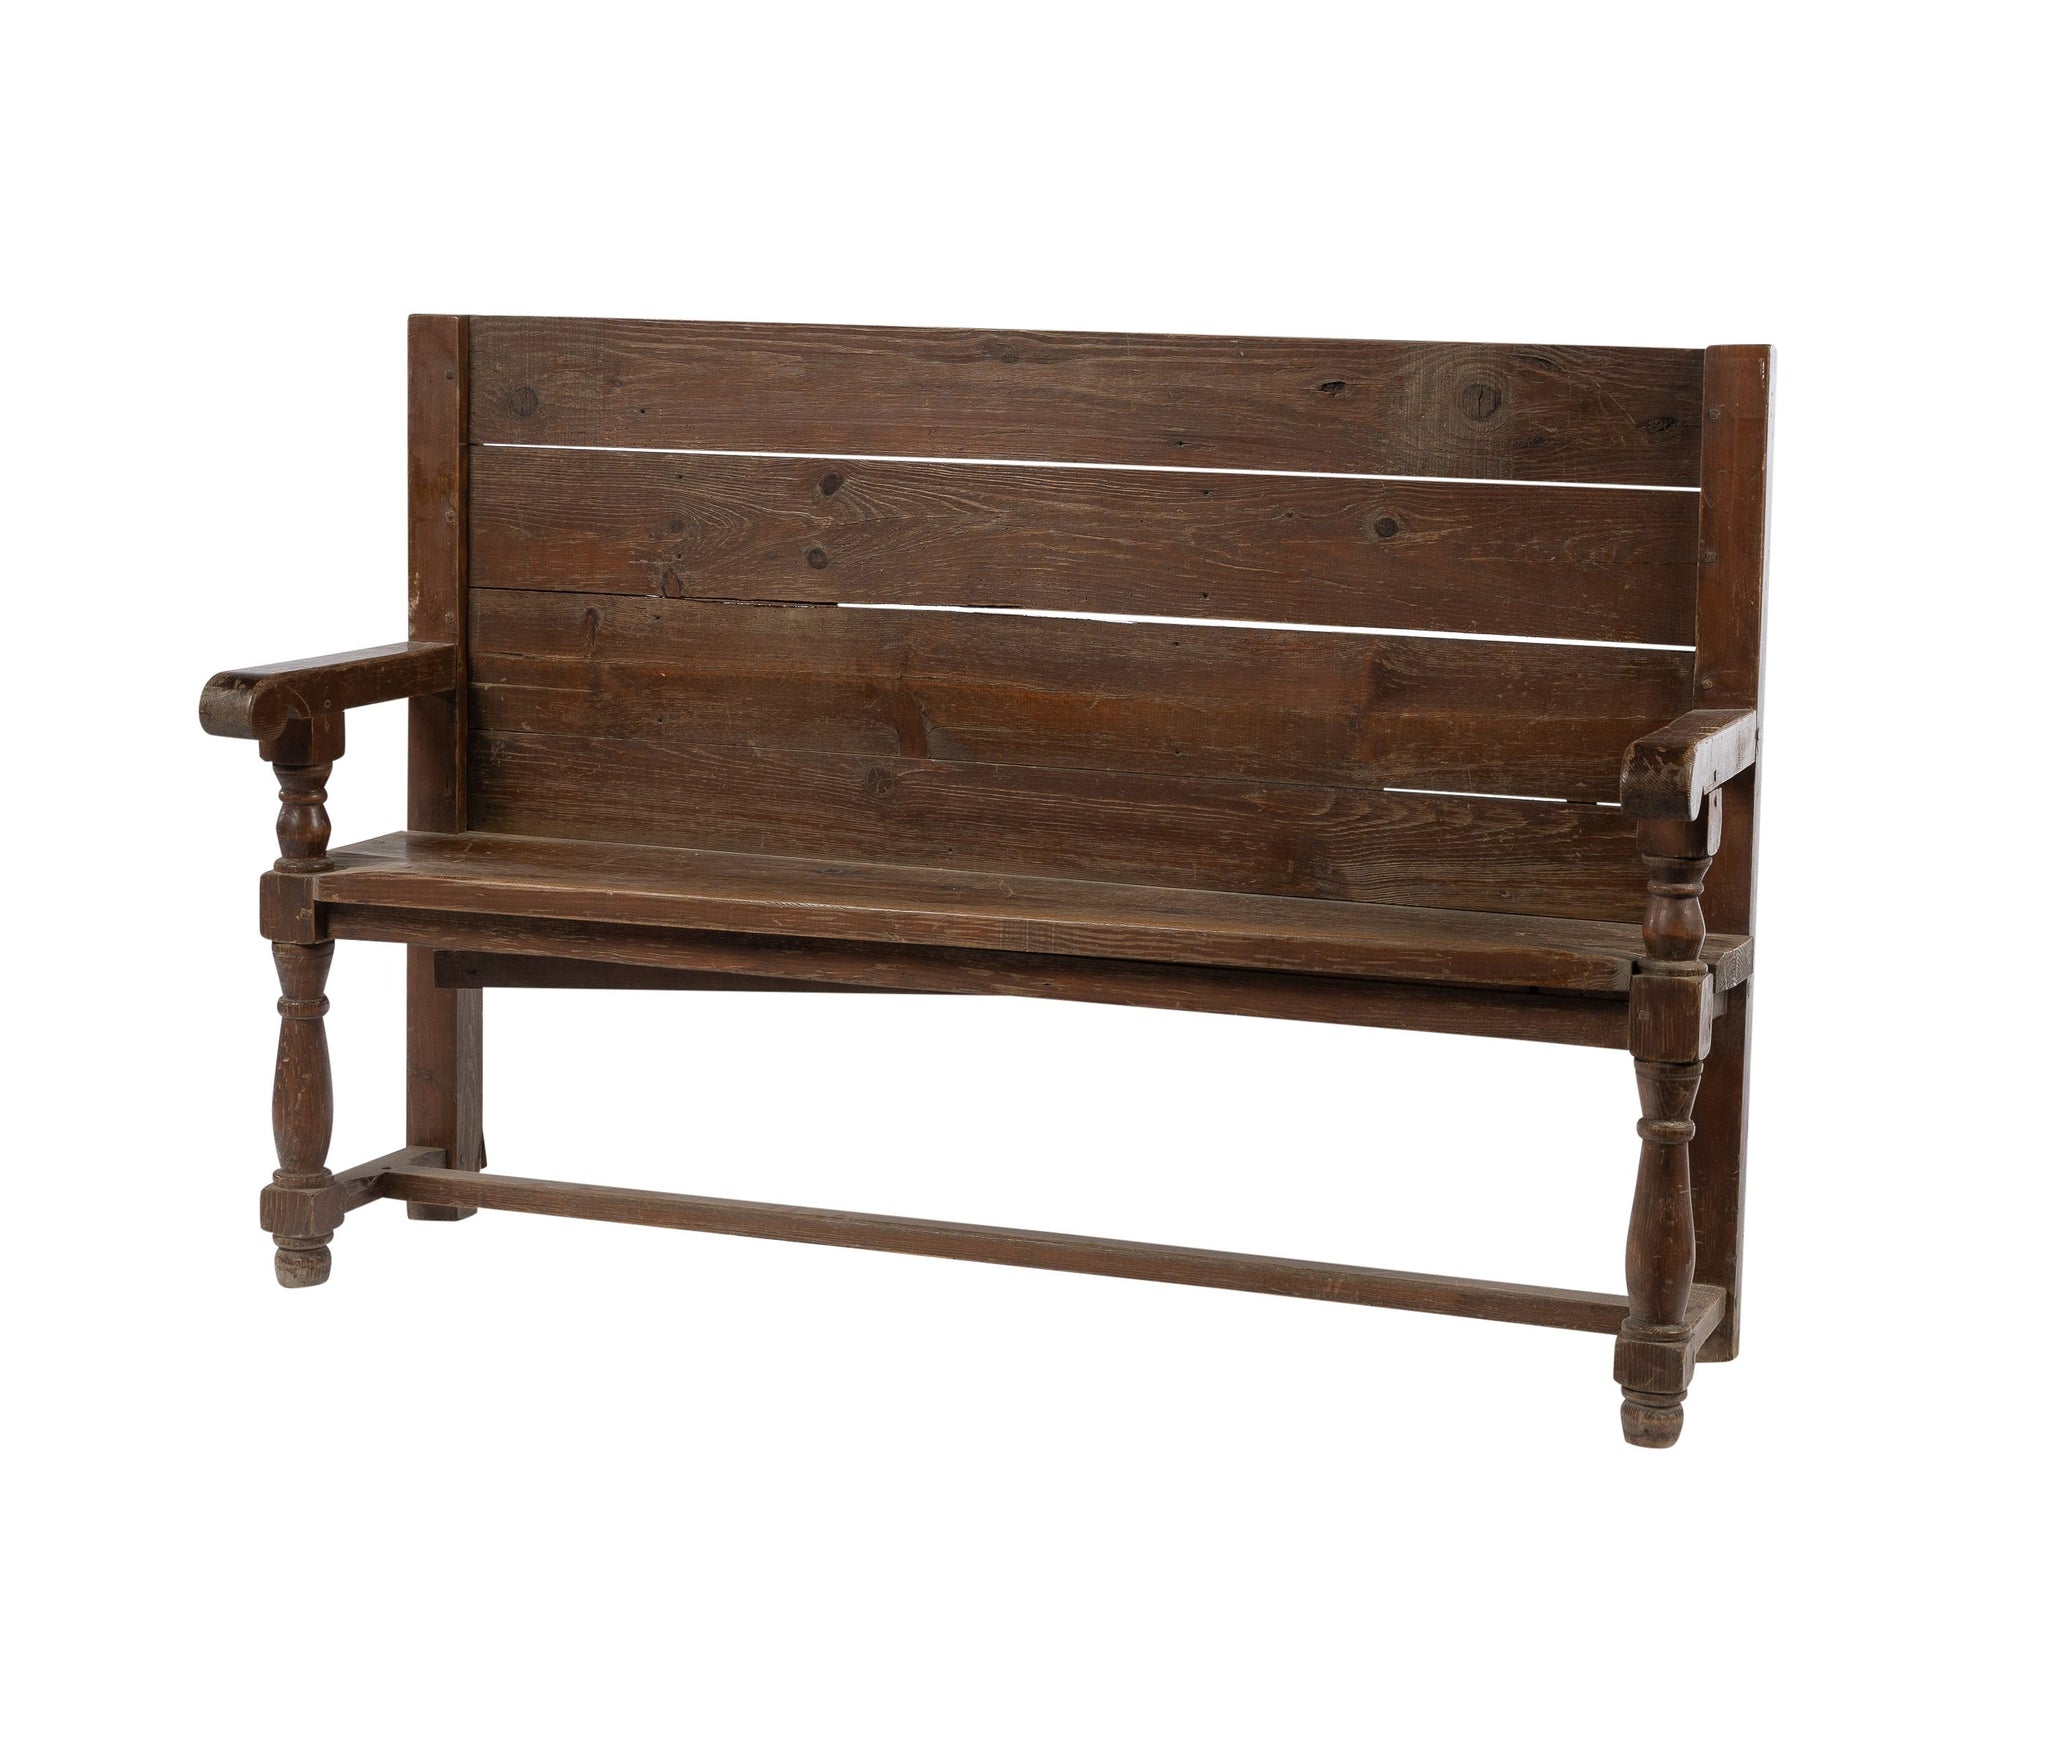 Early 20th century Antique French rustic horse riding boot bench from The Haute Savoie region of France.